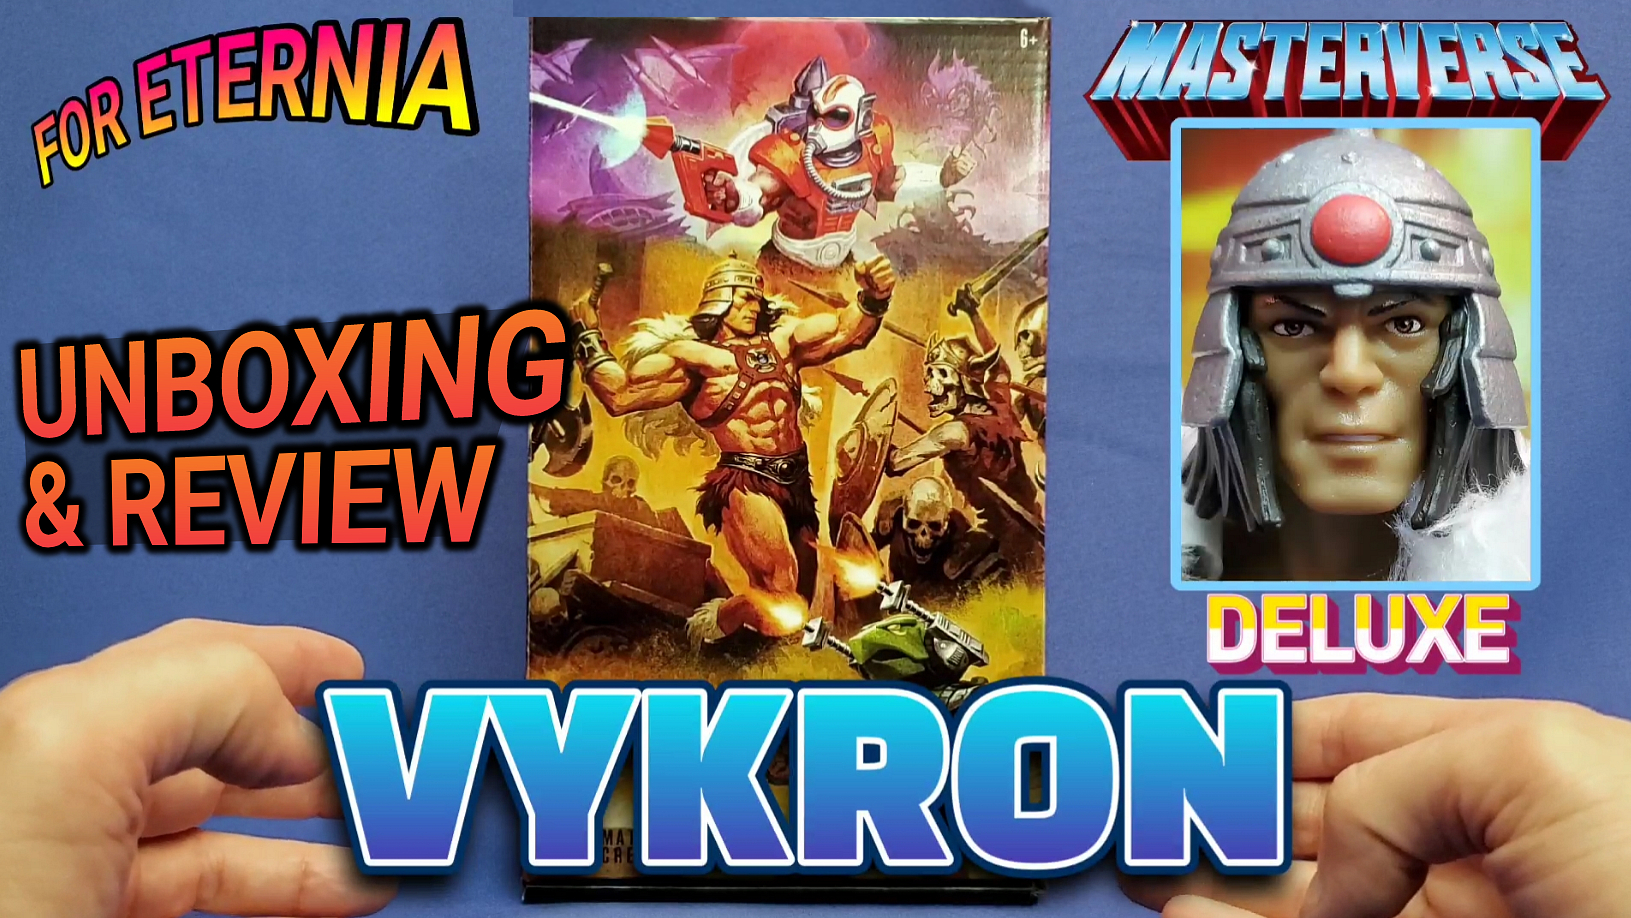 Watch our UNBOXING & REVIEW of the Masterverse VYKRON Mattel Creations Exclusive New Eternia Figure